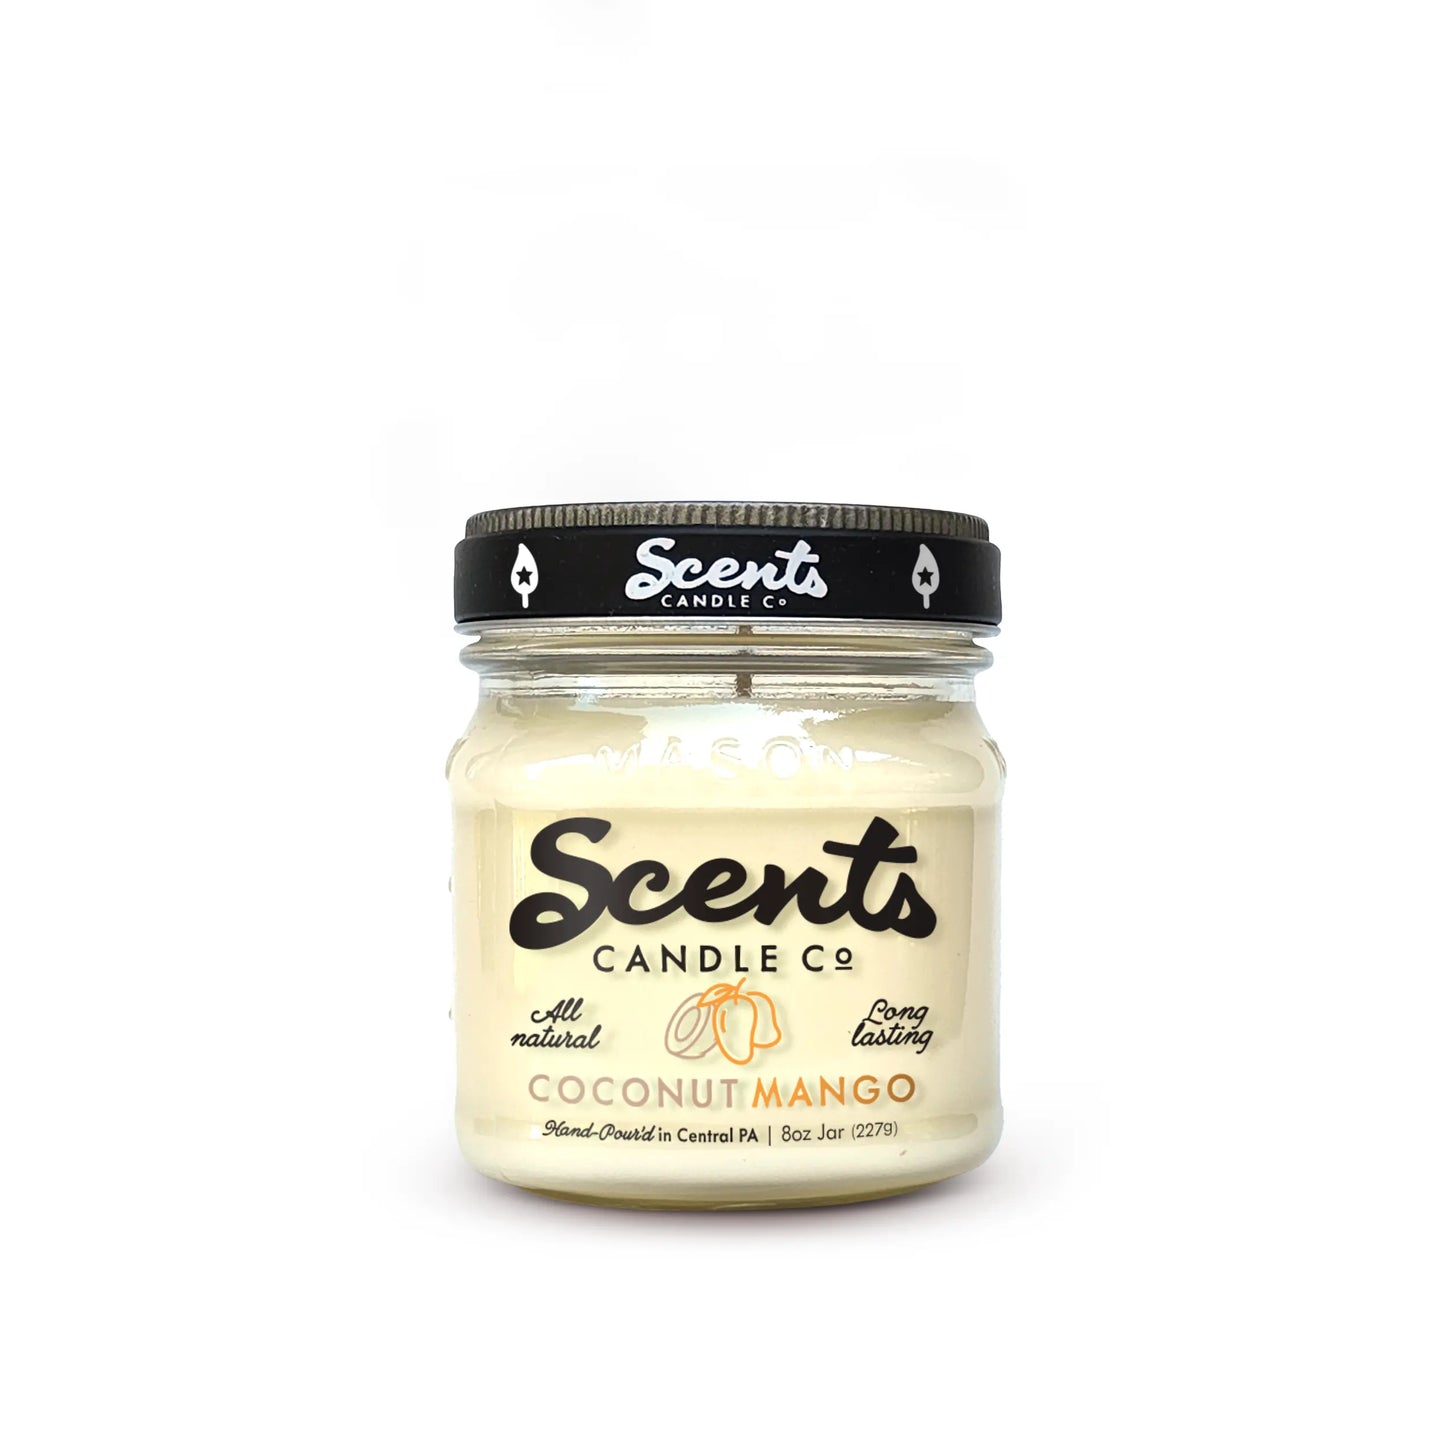 Scents Candle Co. Coconut + Mango Soy Wax Candles